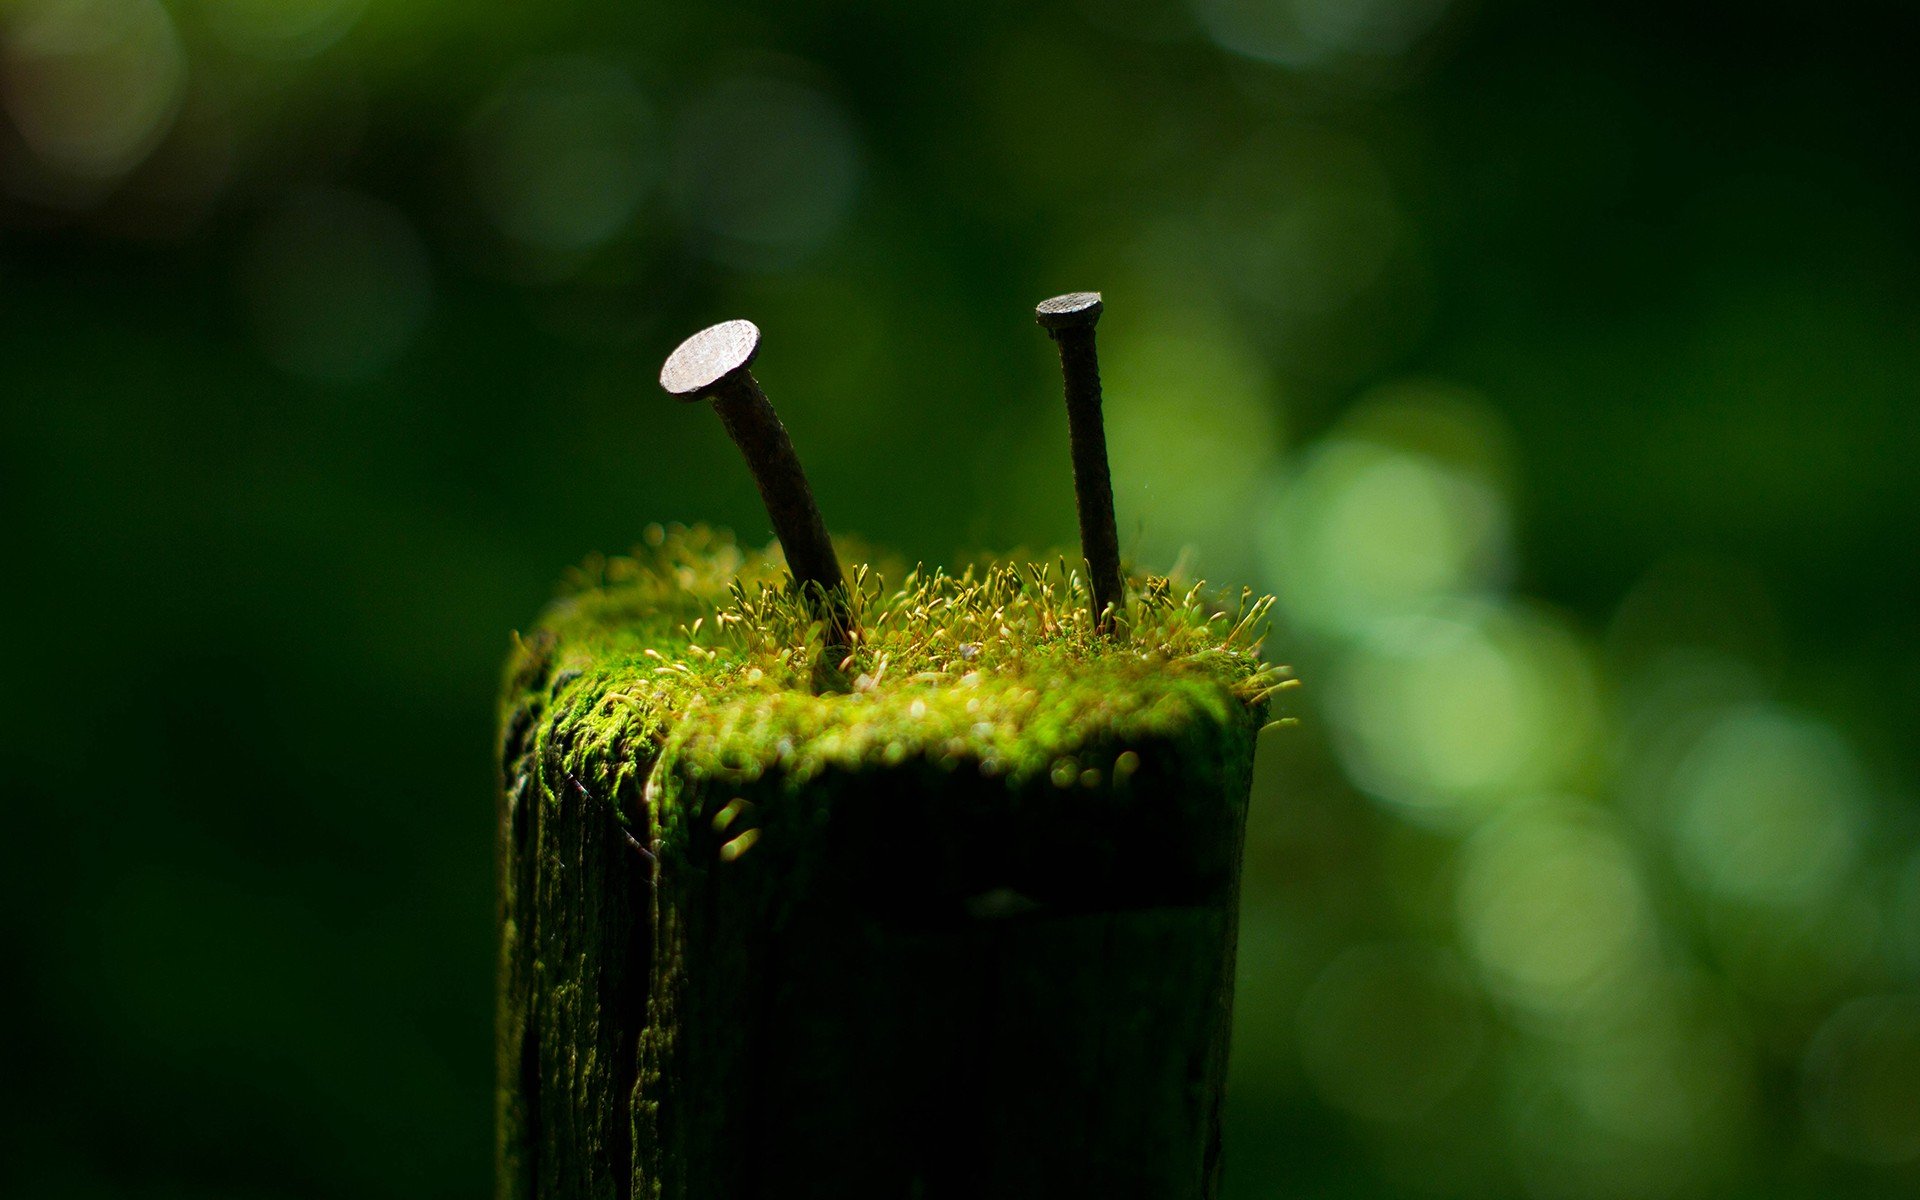 Moss sprouted in a wooden fence.